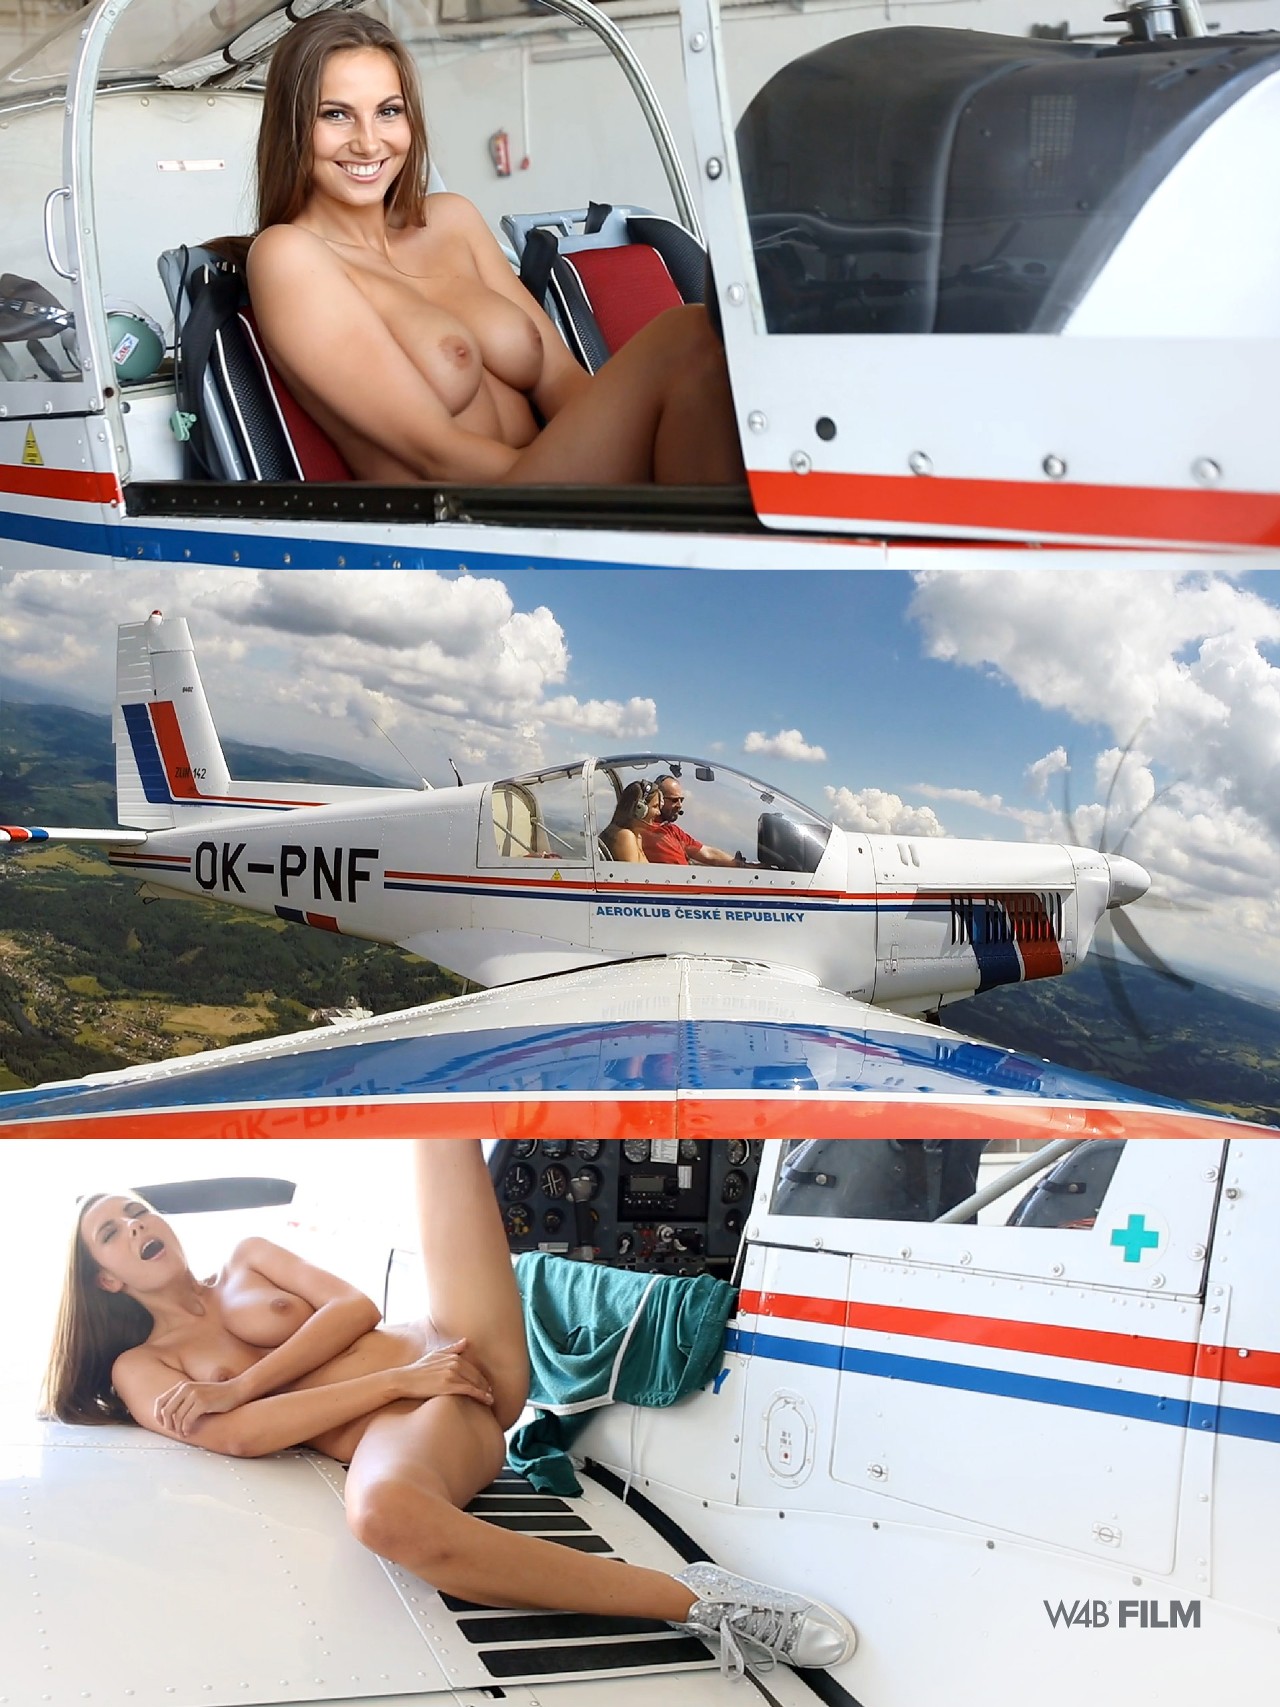 Watch our Connie enjoying her special flight. Wouldn